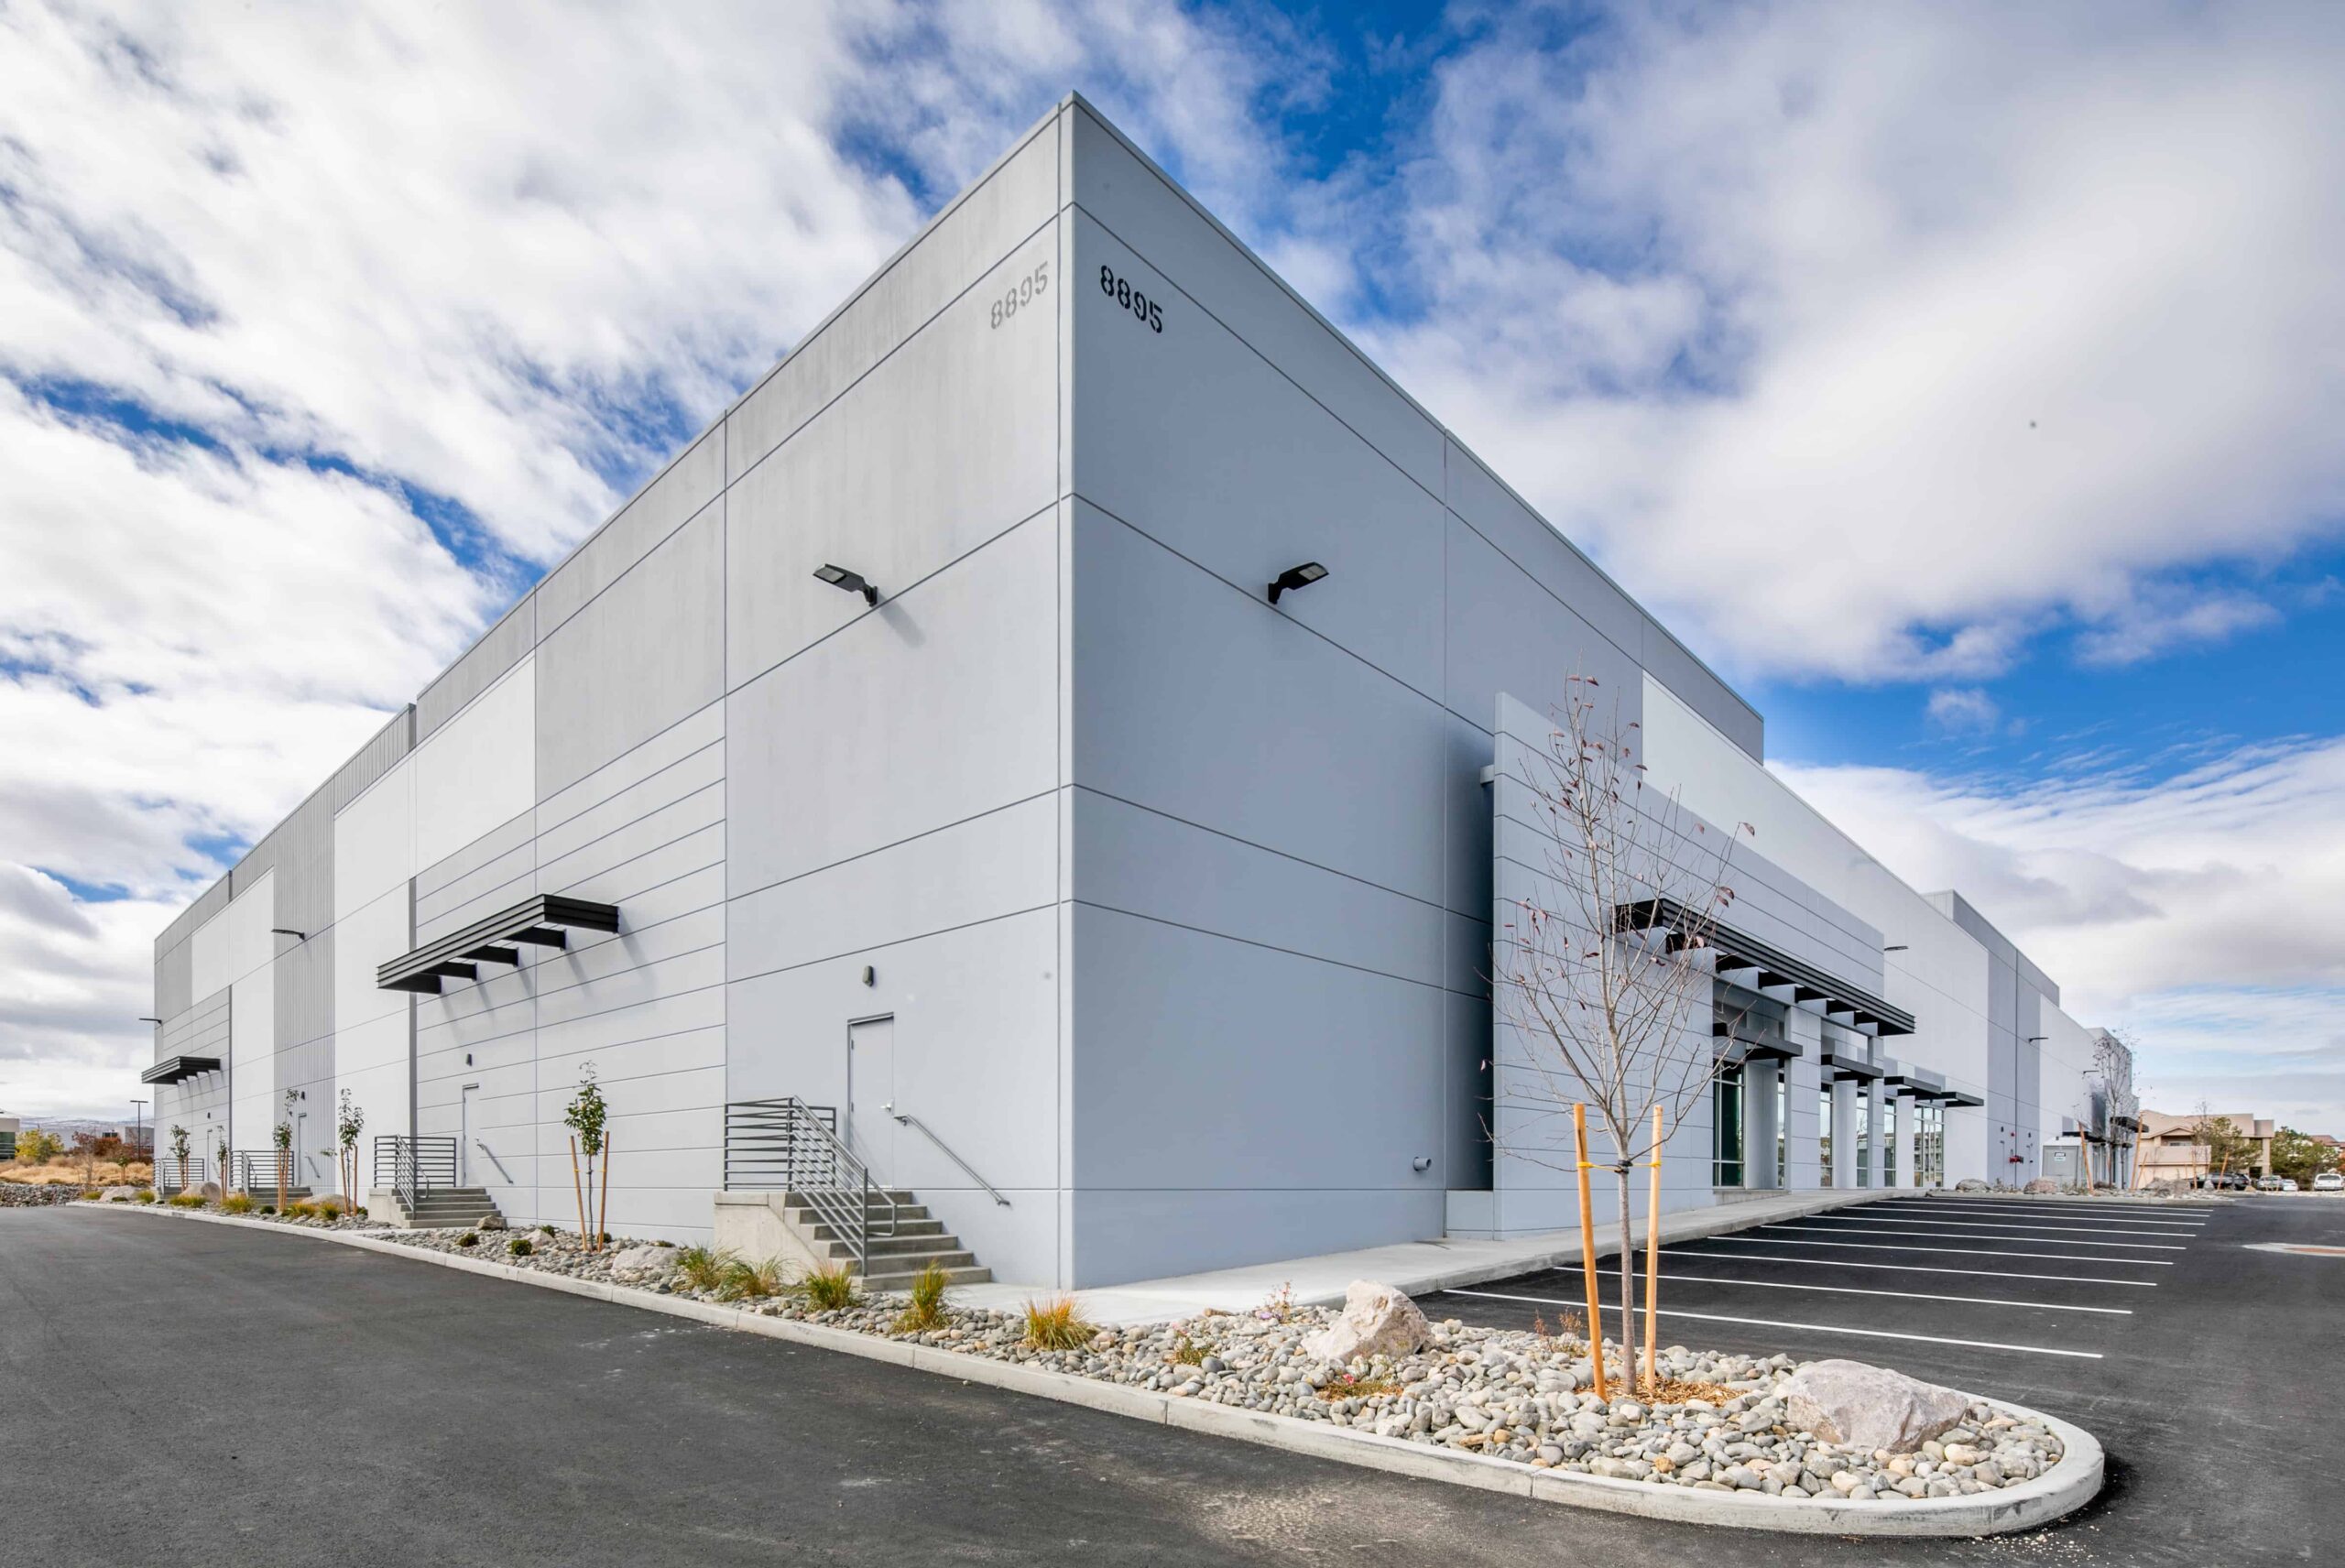 South Reno Industrial, Industrial, Investment Property, Real Estate Fund, Landrock, Landrock LP, WHIREP, WHI Real Estate Partners